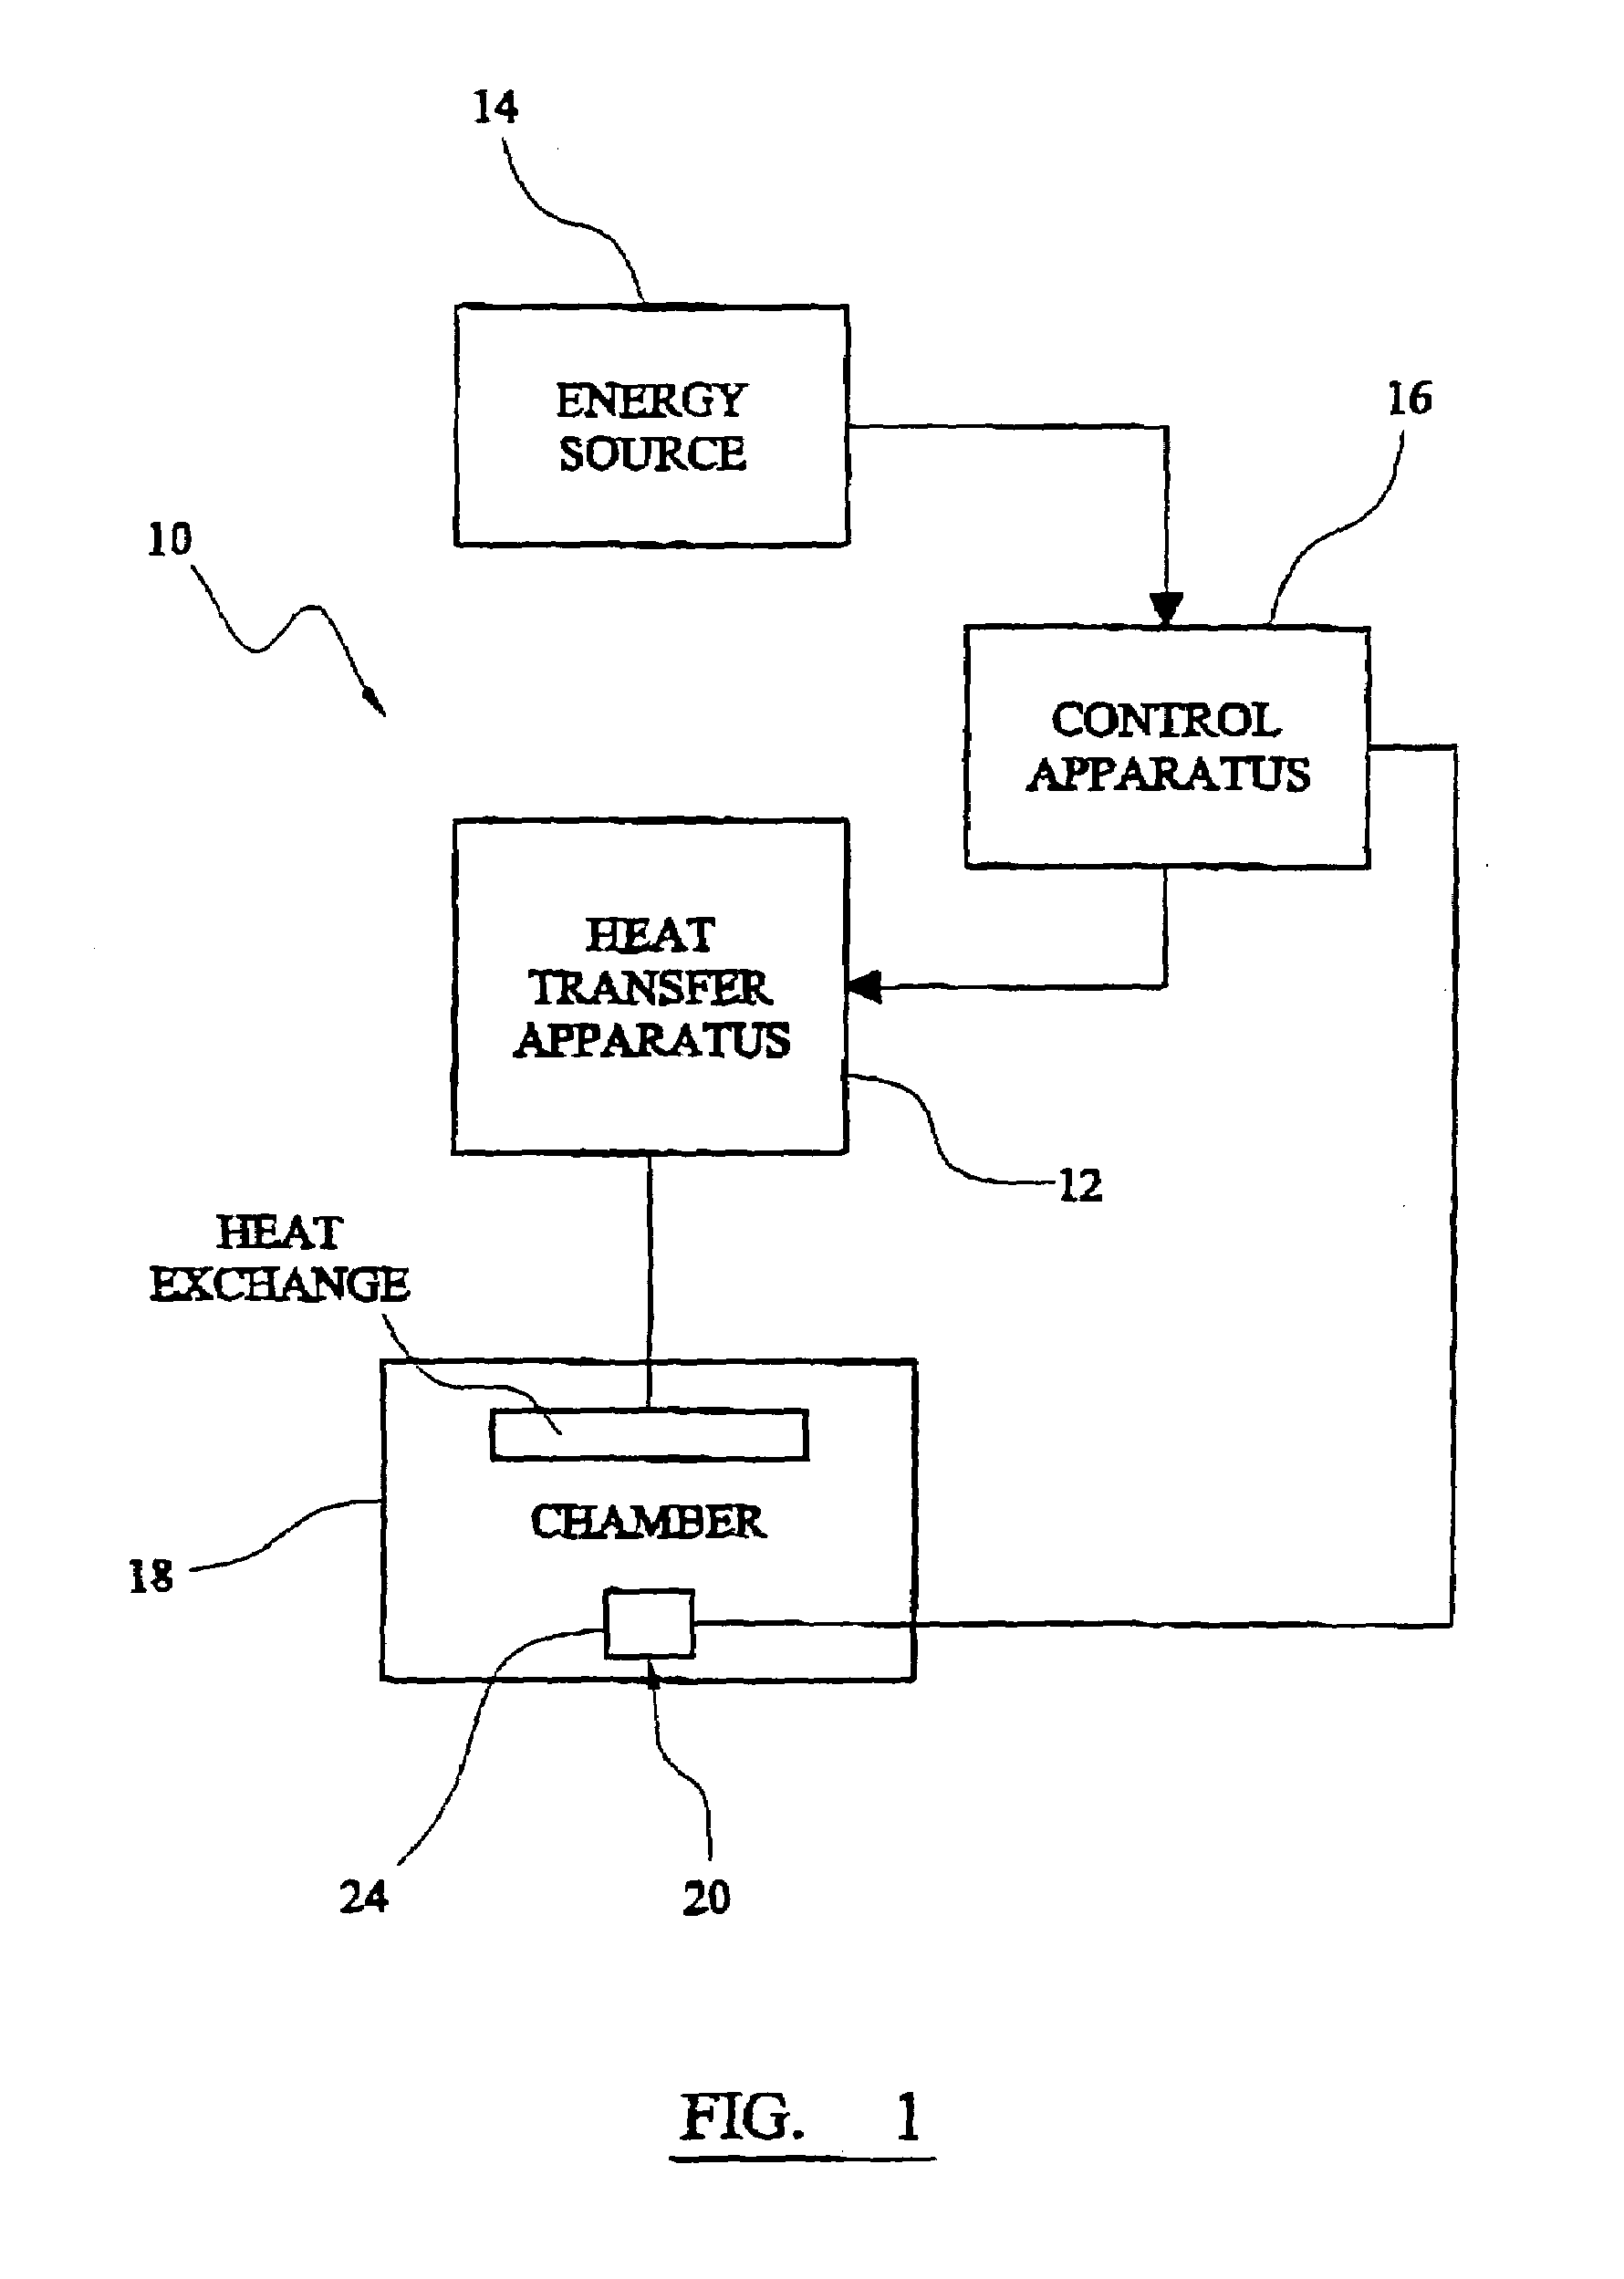 Method and apparatus for controlling refrigeration